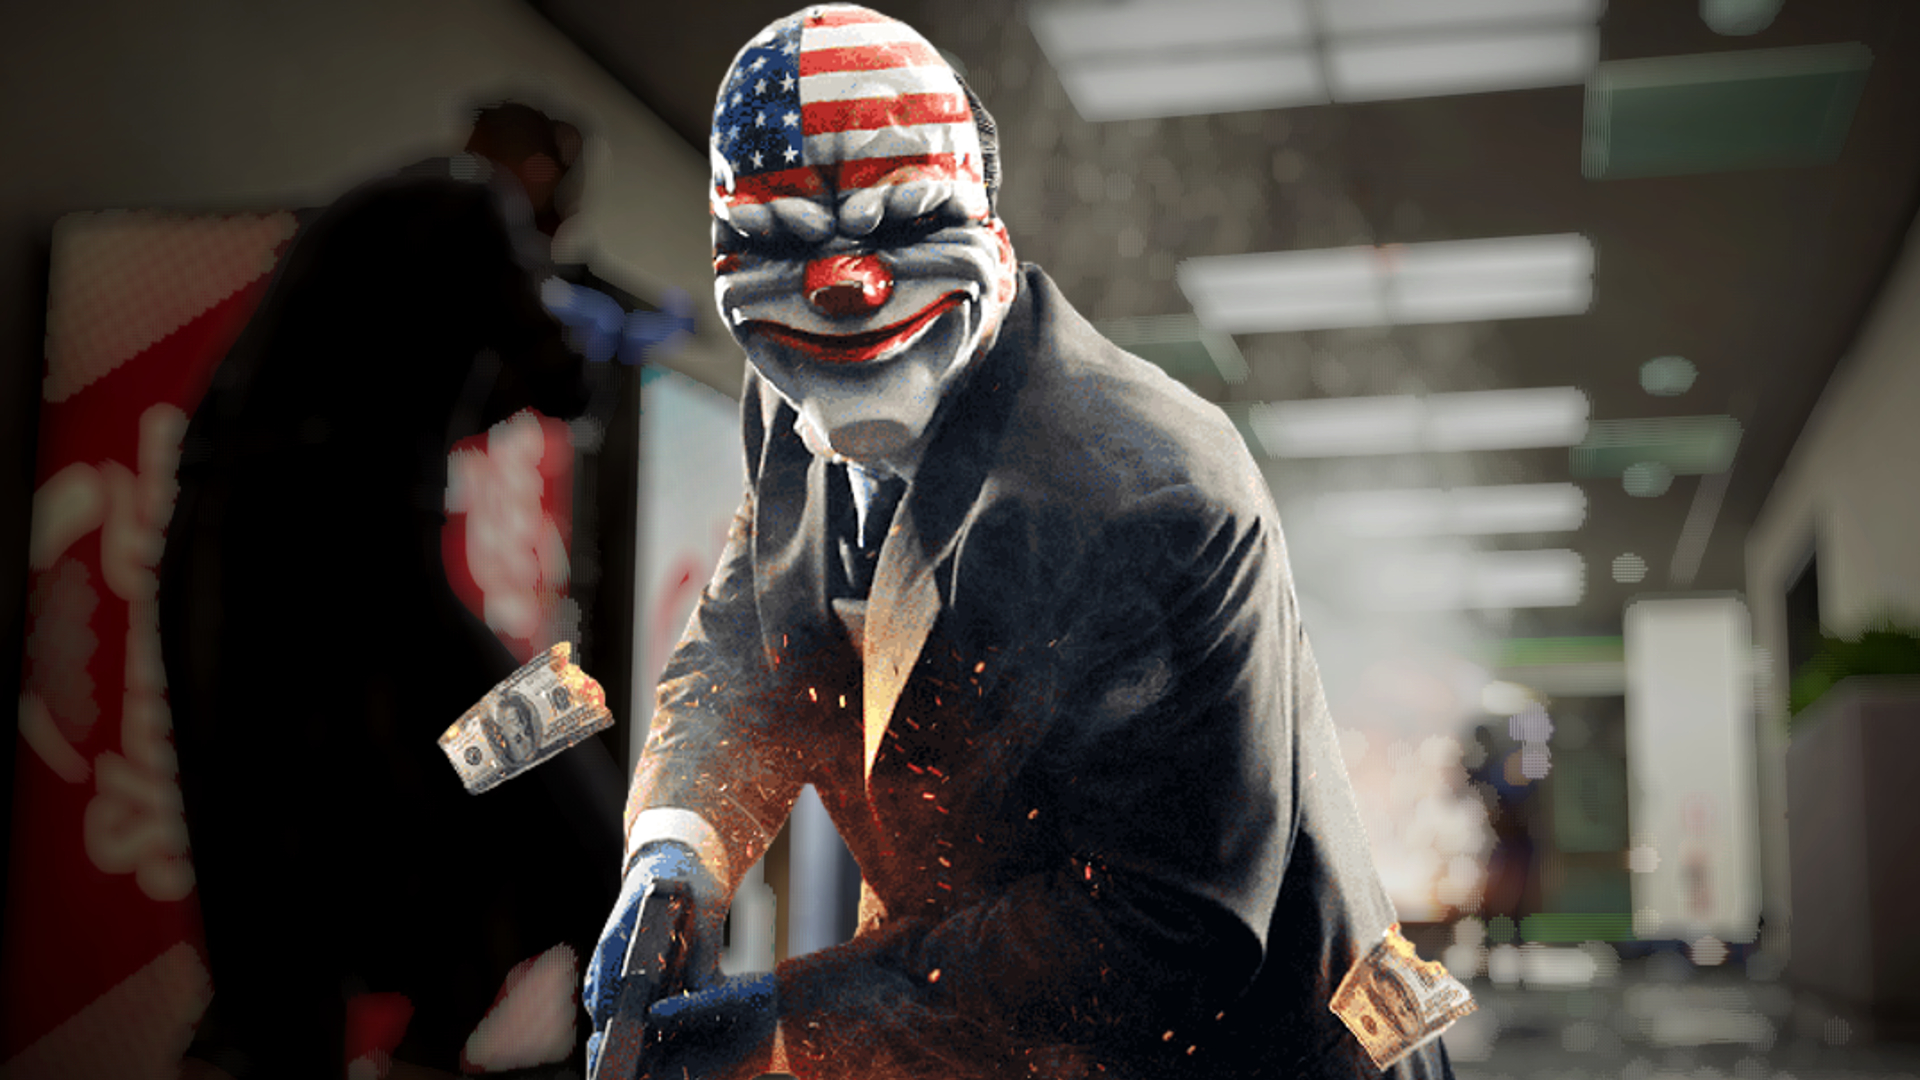 Payday 3 will no longer use anti-piracy software Denuvo, devs announce  days before launch